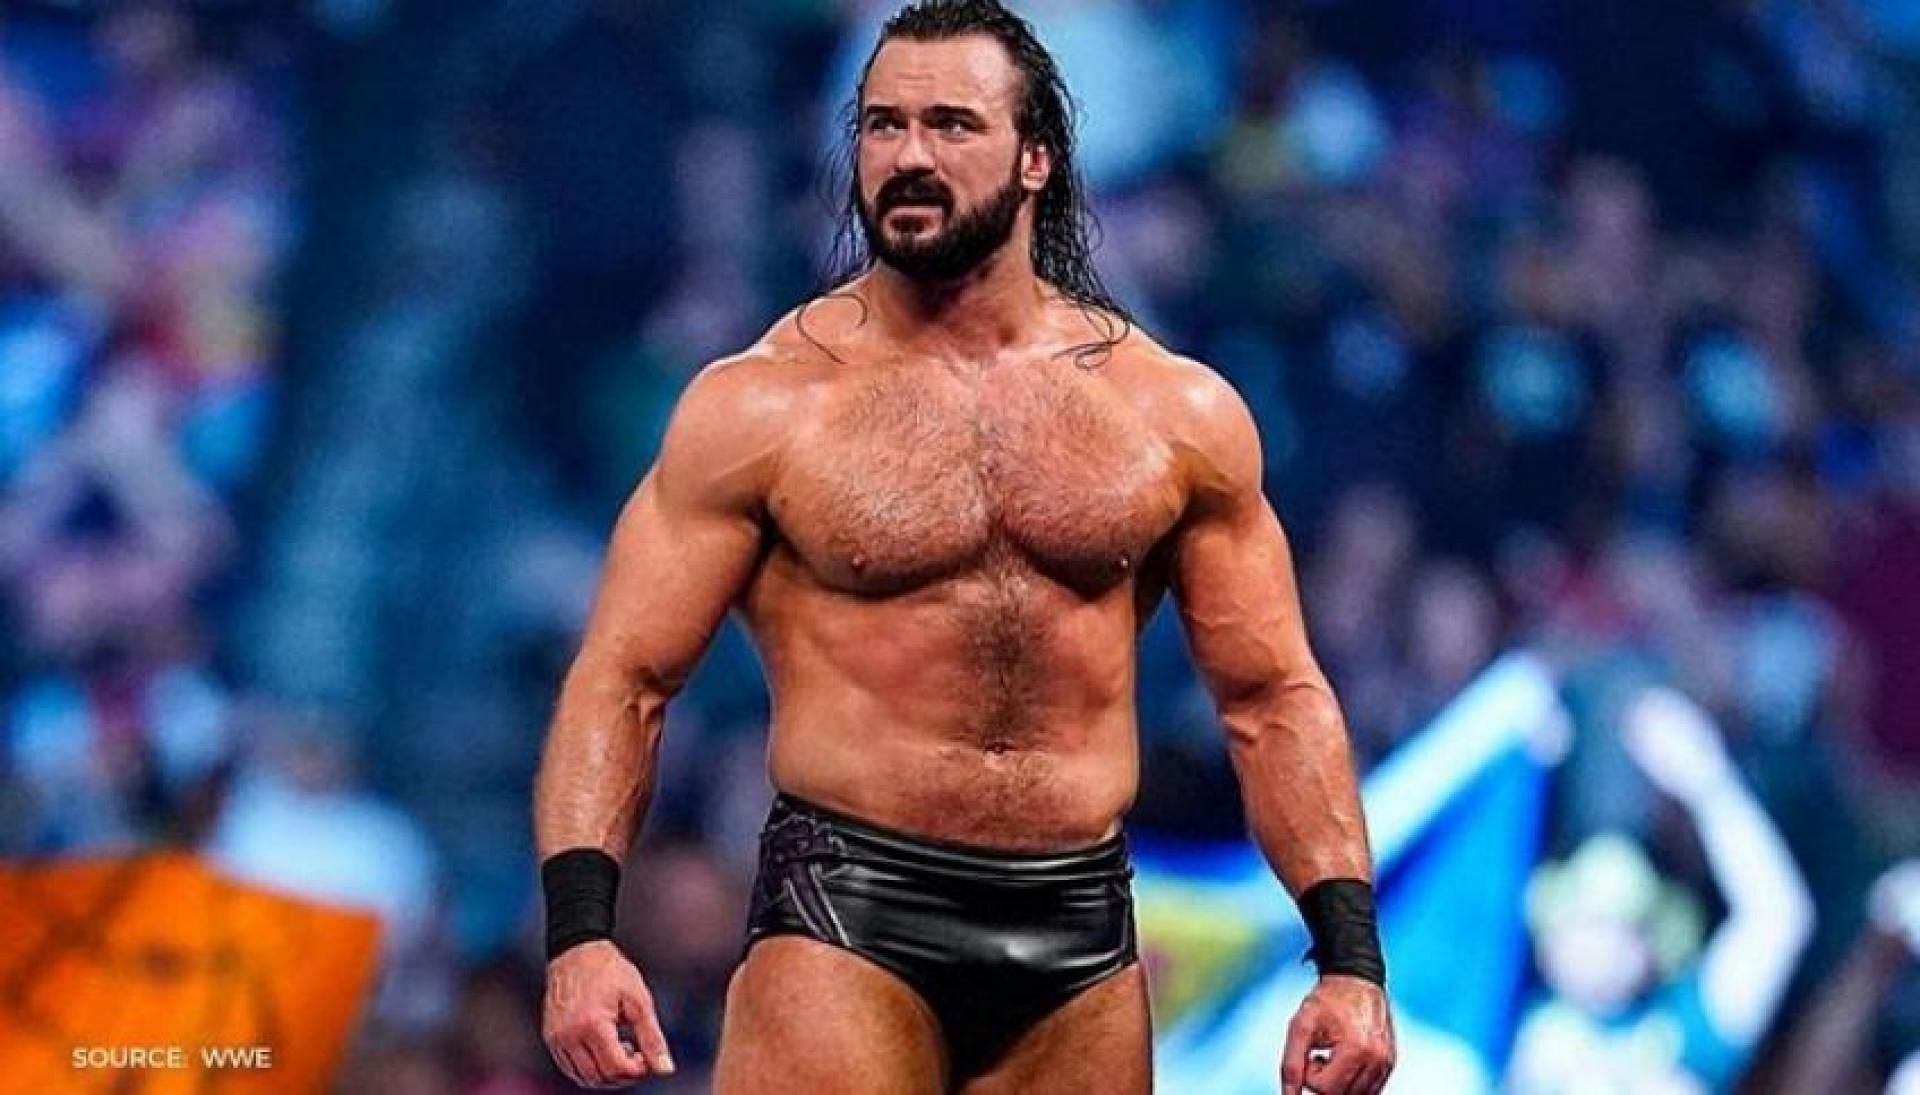 What&#039;s next for McIntyre after a match with Happy Corbin?